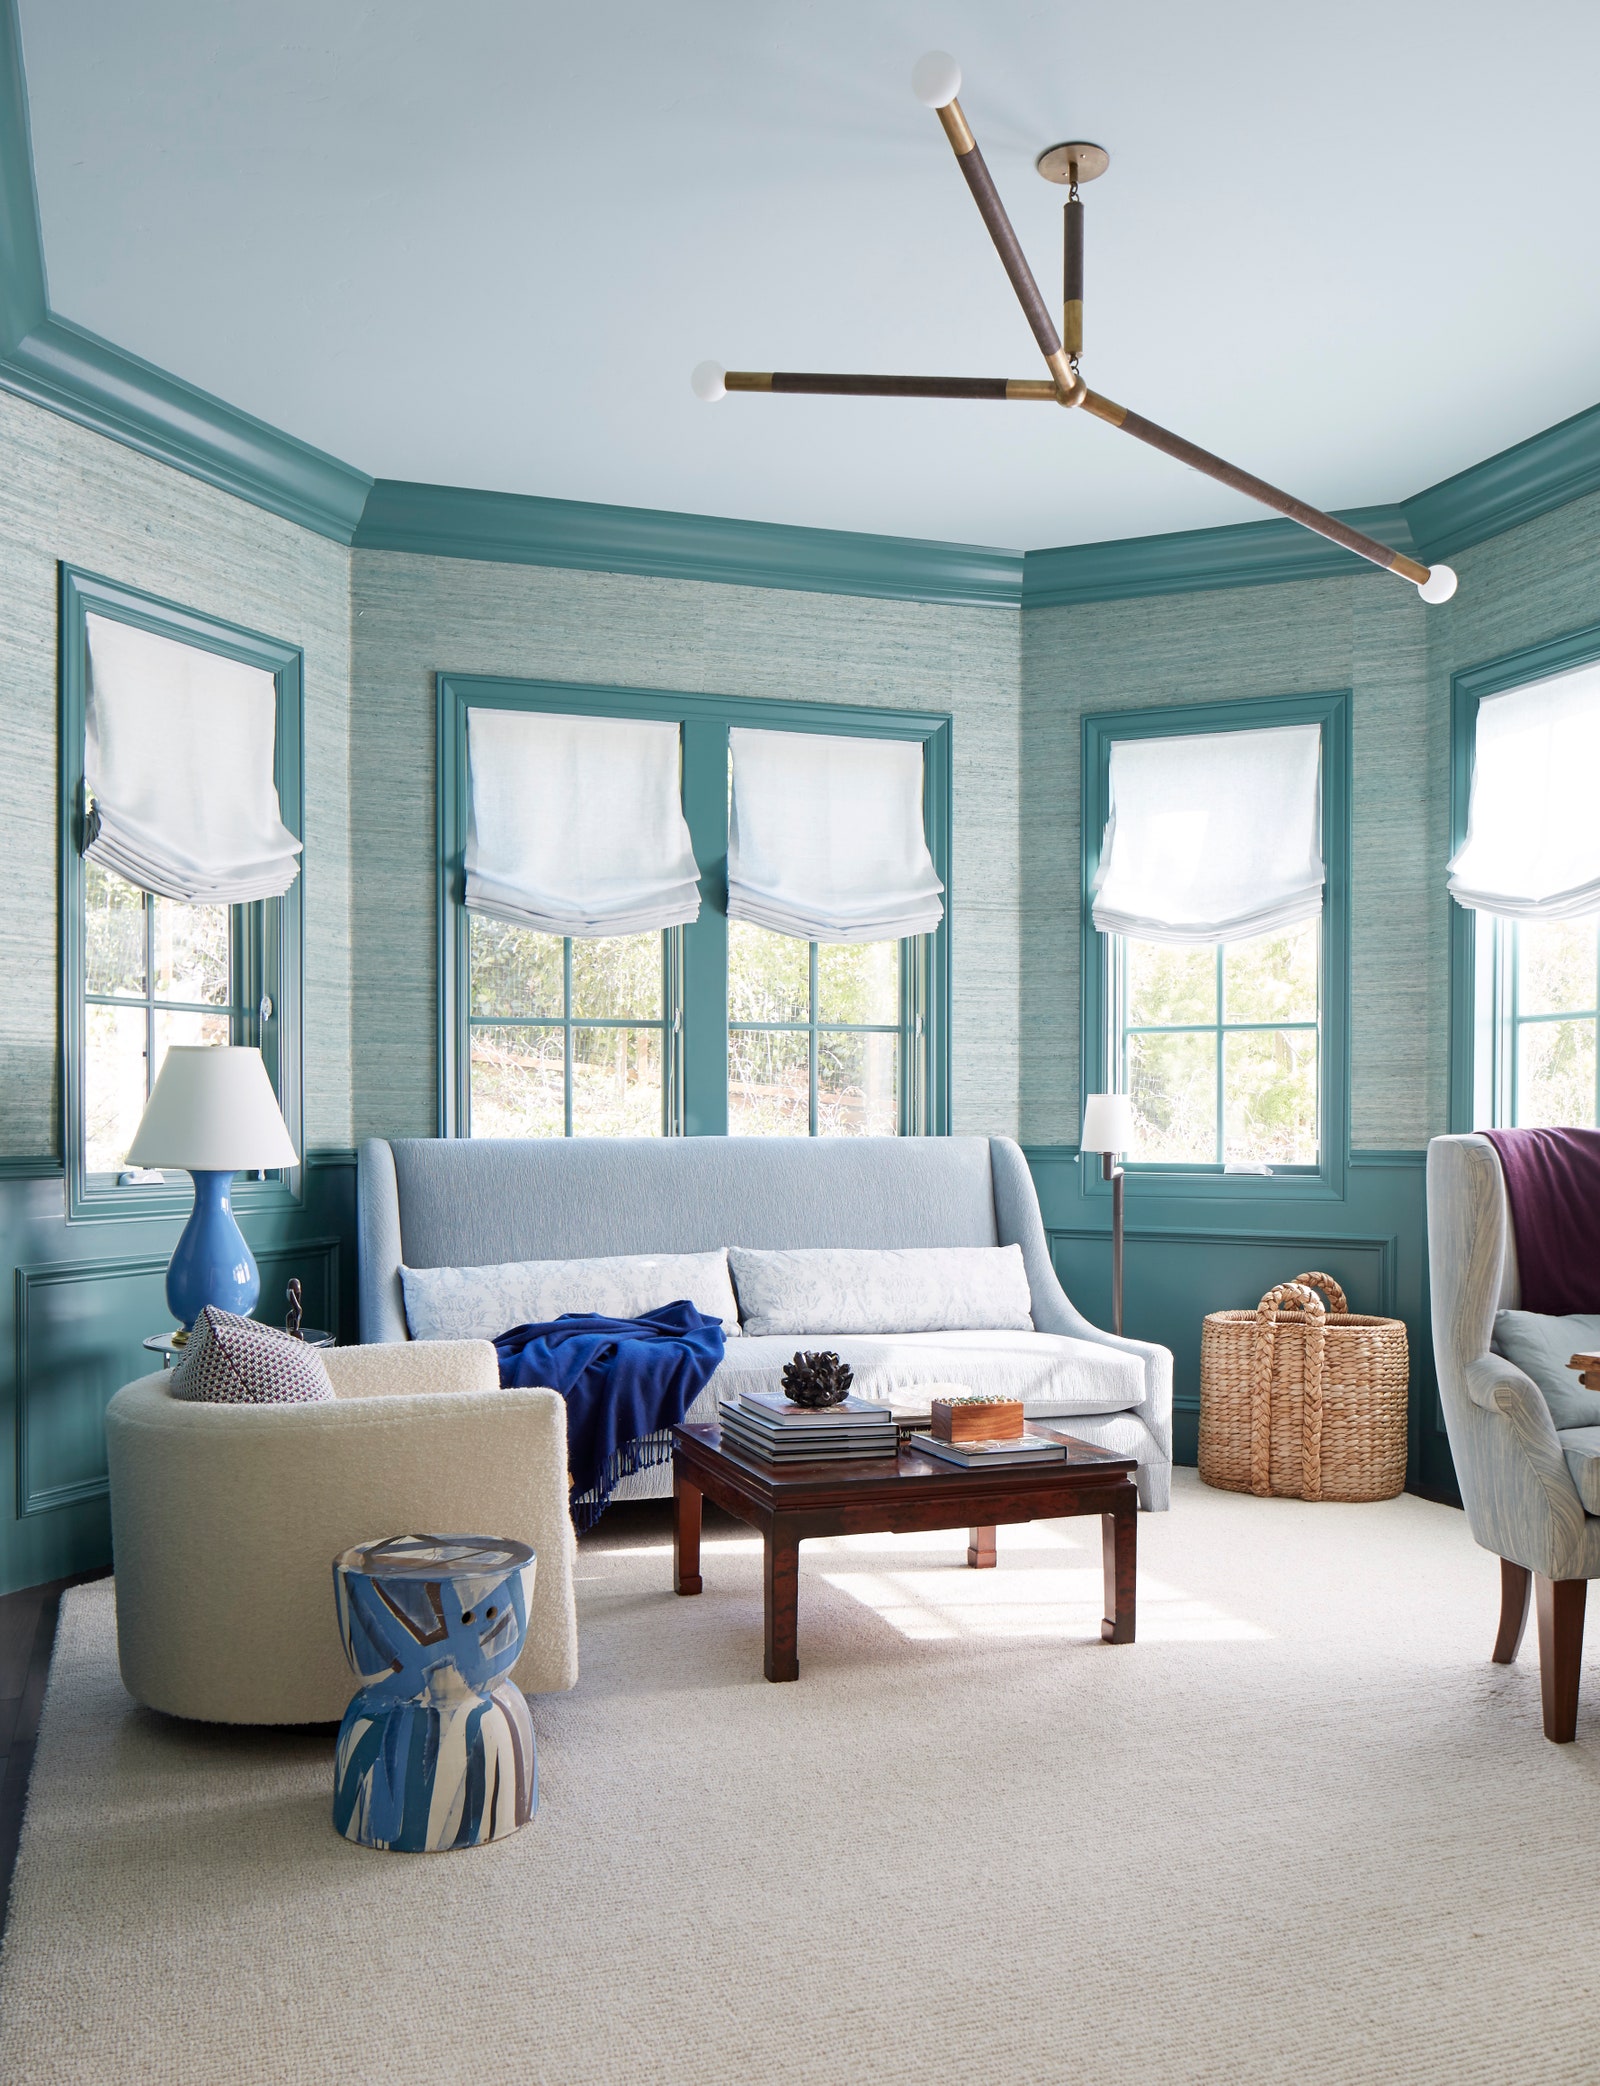 Verdigris enlivens the trim in this sunny room by Heather Hilliard Design.